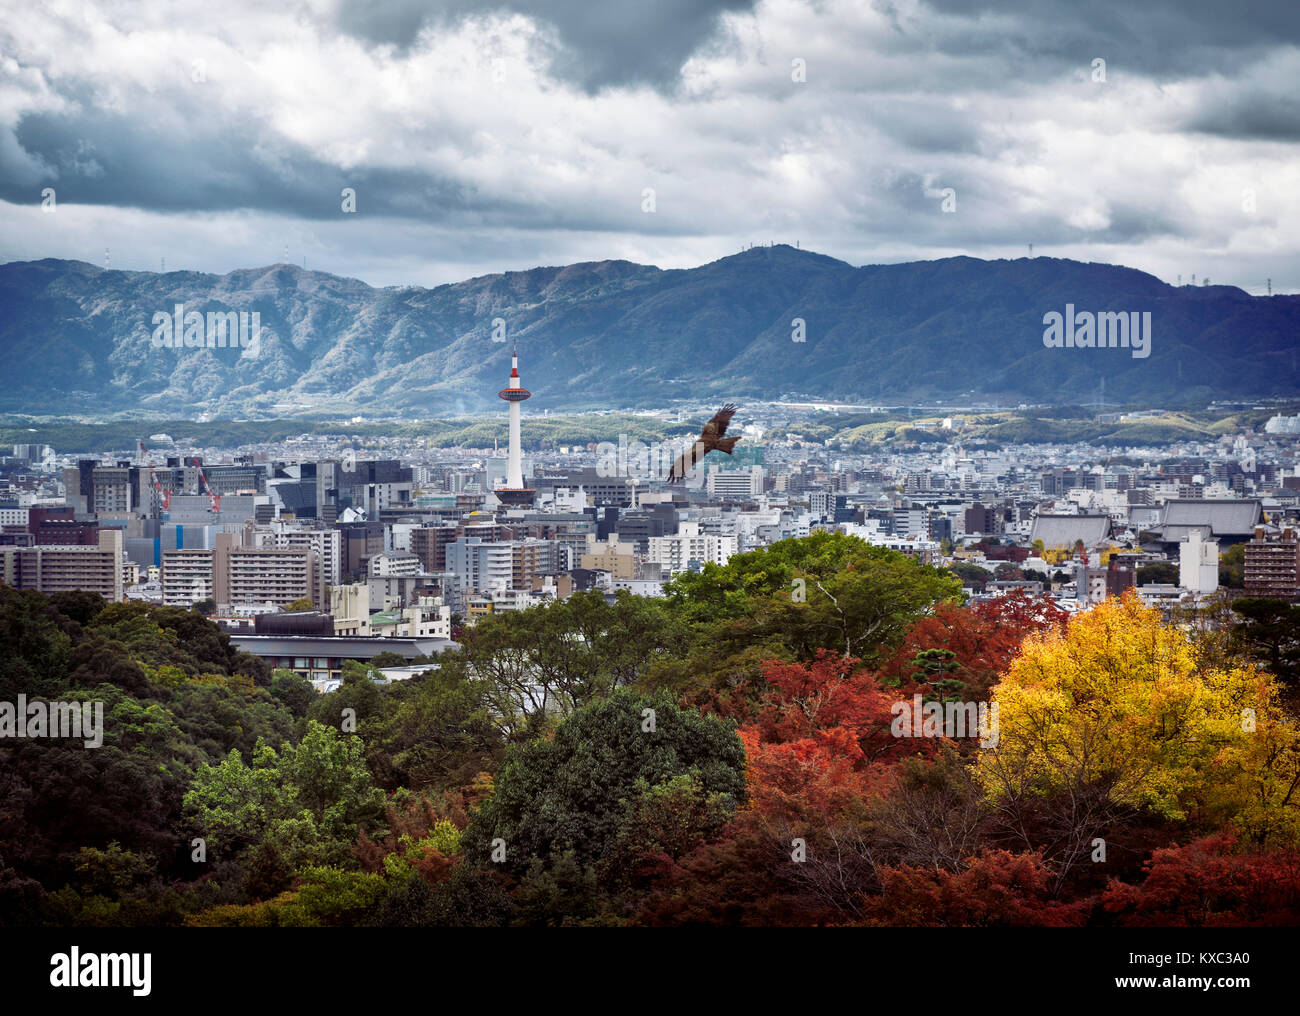 License and prints at MaximImages.com - Kyoto tower in city landscape with an eagle flying by and mountains in the background under dramatic stormy Stock Photo